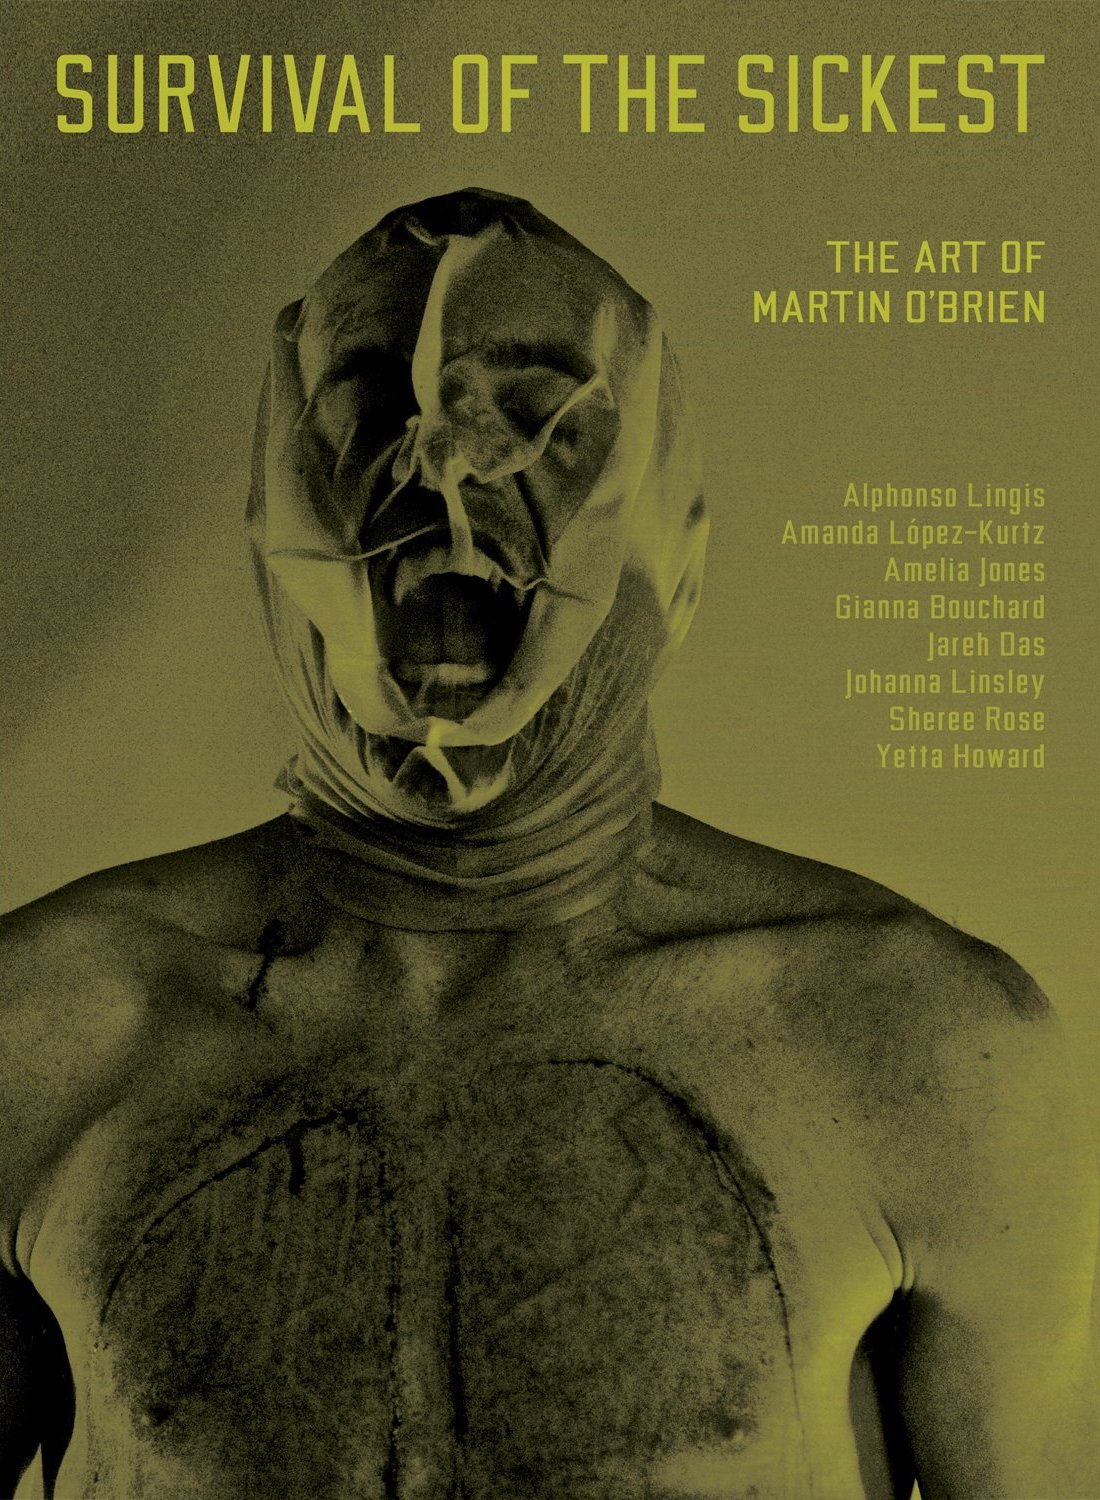 The cover of Martin O'Brien's book showing his face covered in a layer of latex